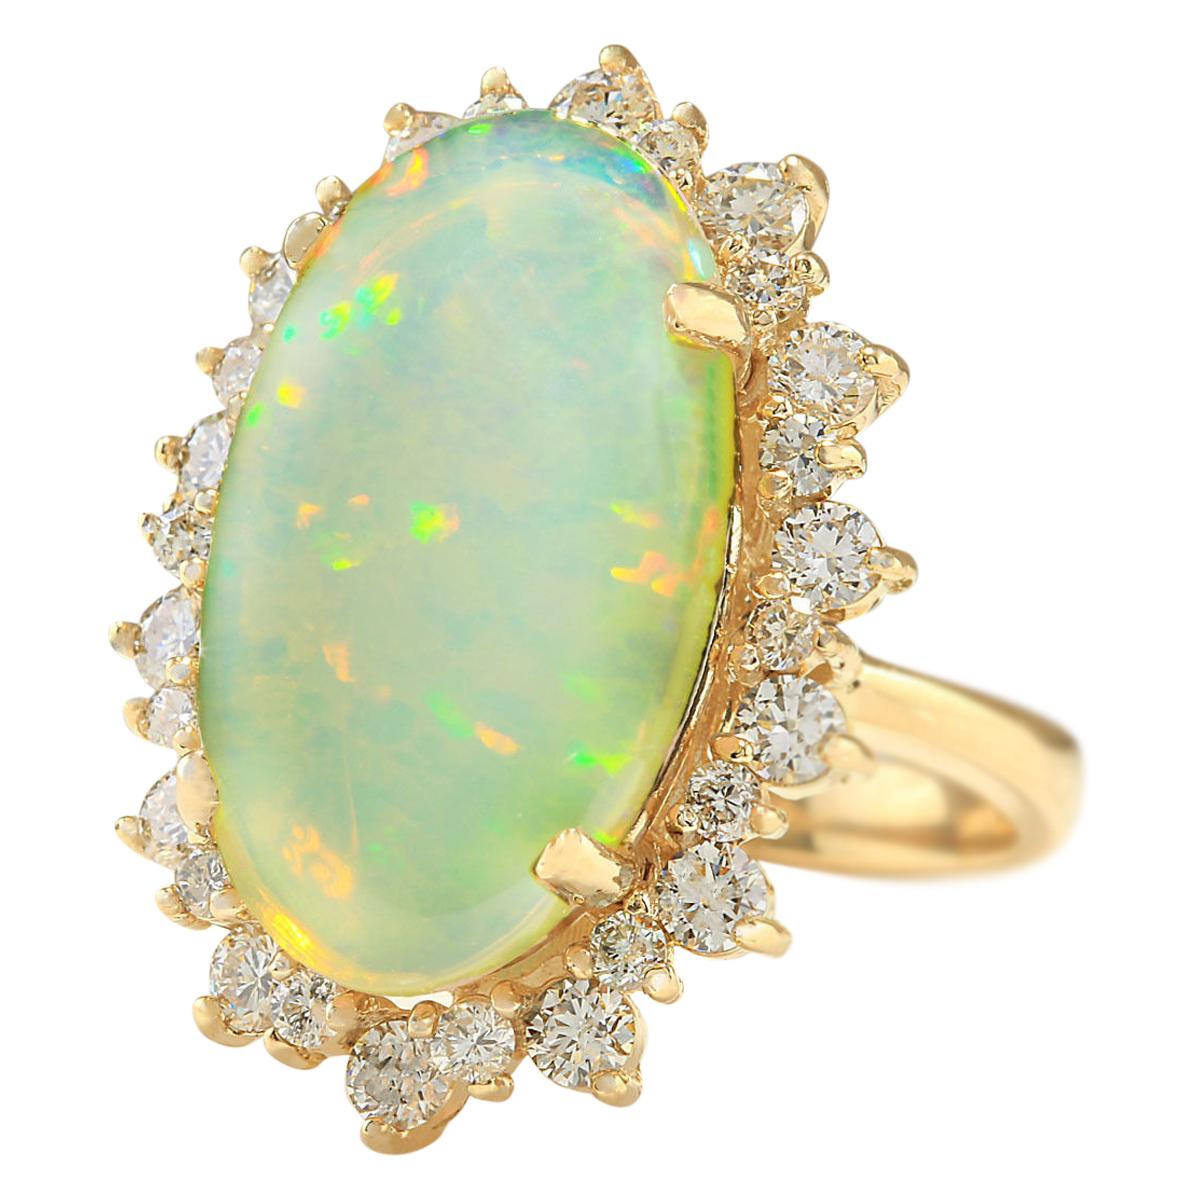 Stamped: 14K Yellow Gold
Total Ring Weight: 8.8 Grams
Total Natural Opal Weight is 7.09 Carat (Measures: 20.00x12.00 mm)
Color: Multicolor
Total Natural Diamond Weight is 1.20 Carat
Color: F-G, Clarity: VS2-SI1
Face Measures: 26.65x18.75 mm
Sku: